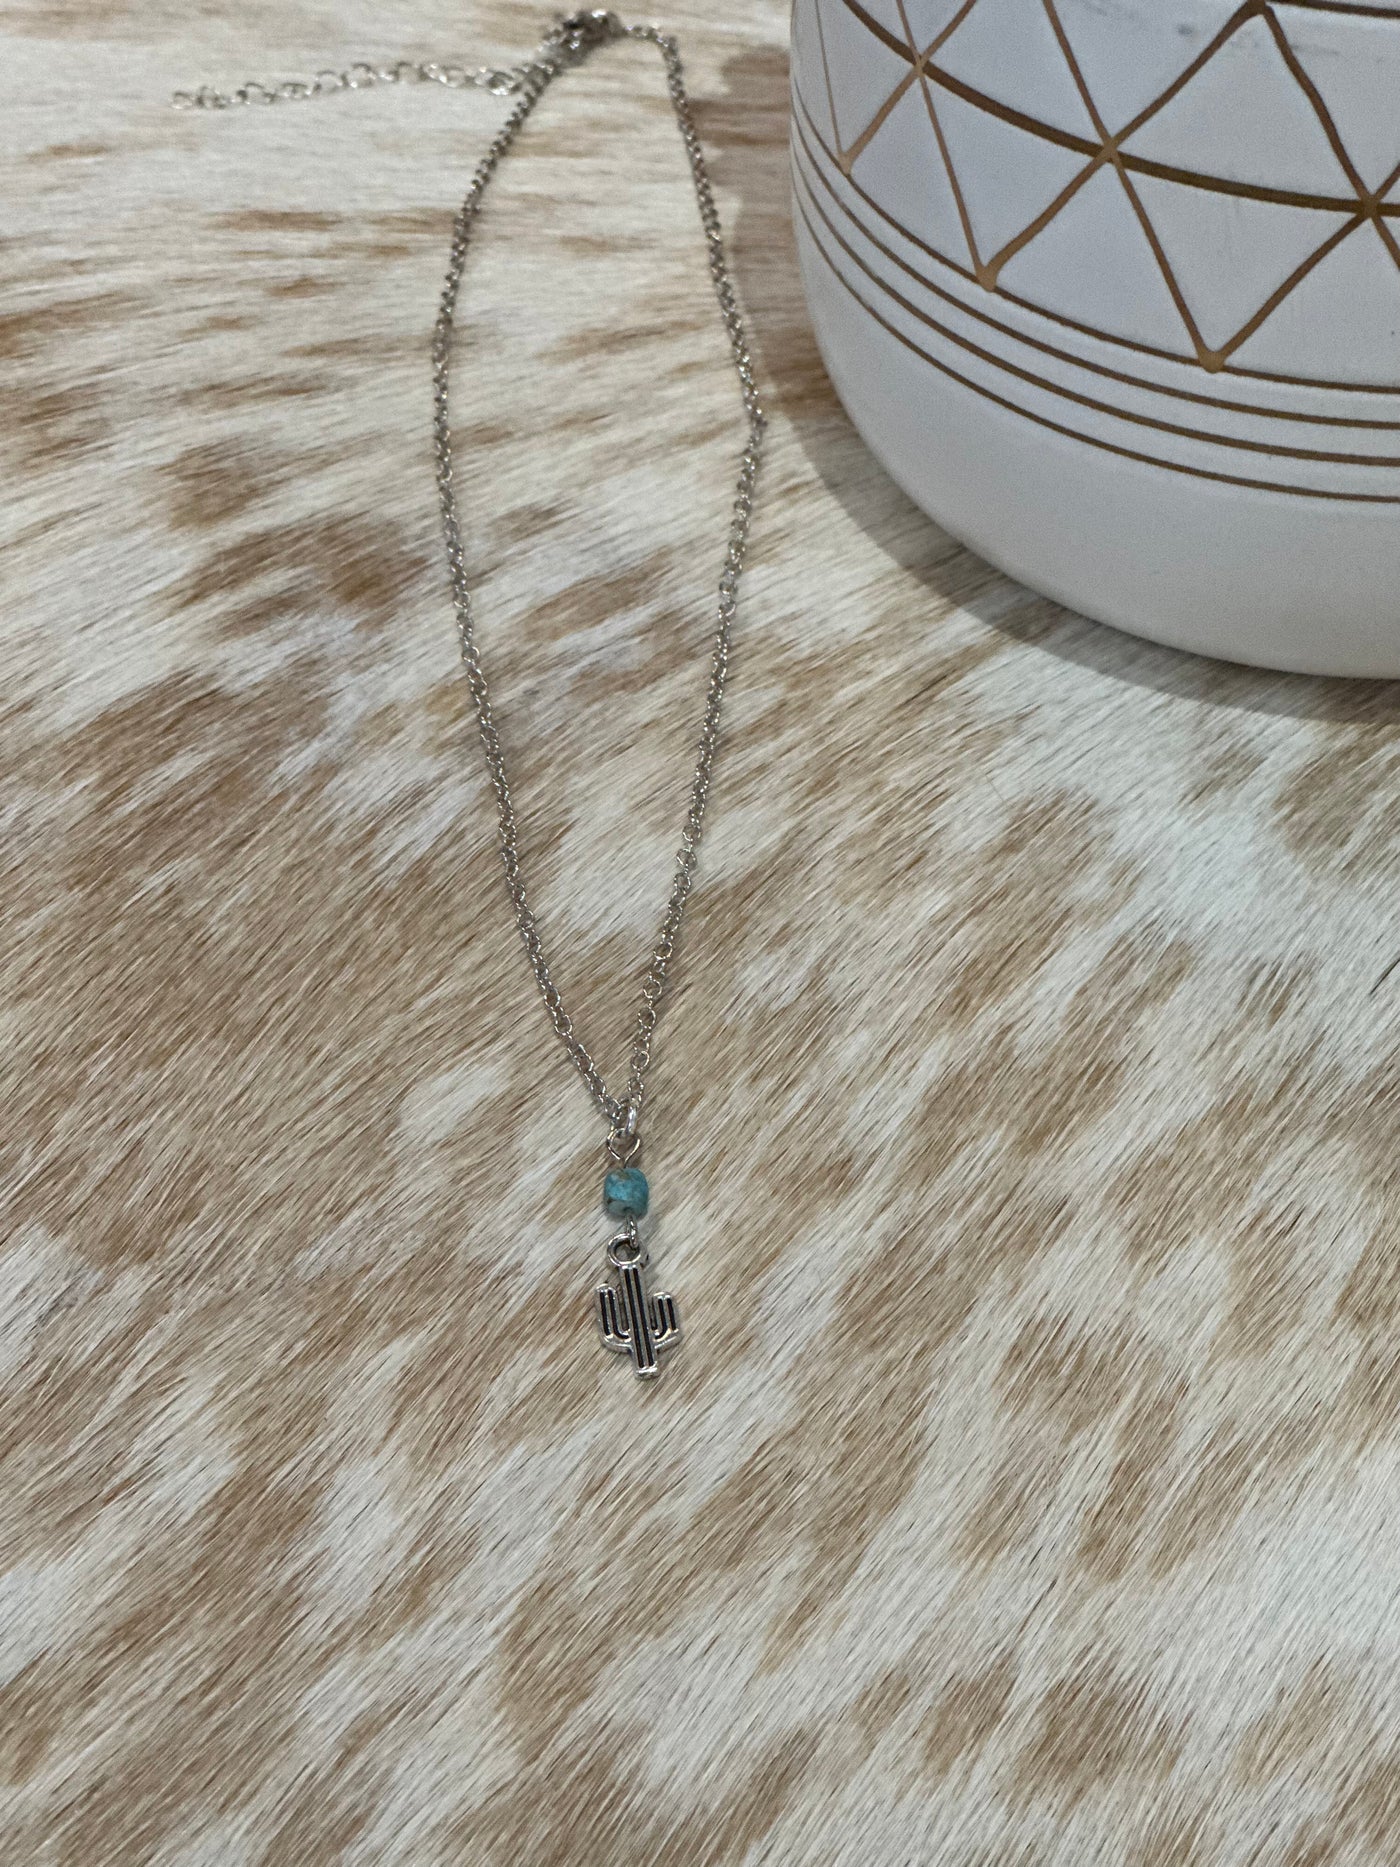 Turquoise and Cactus Chain Necklace